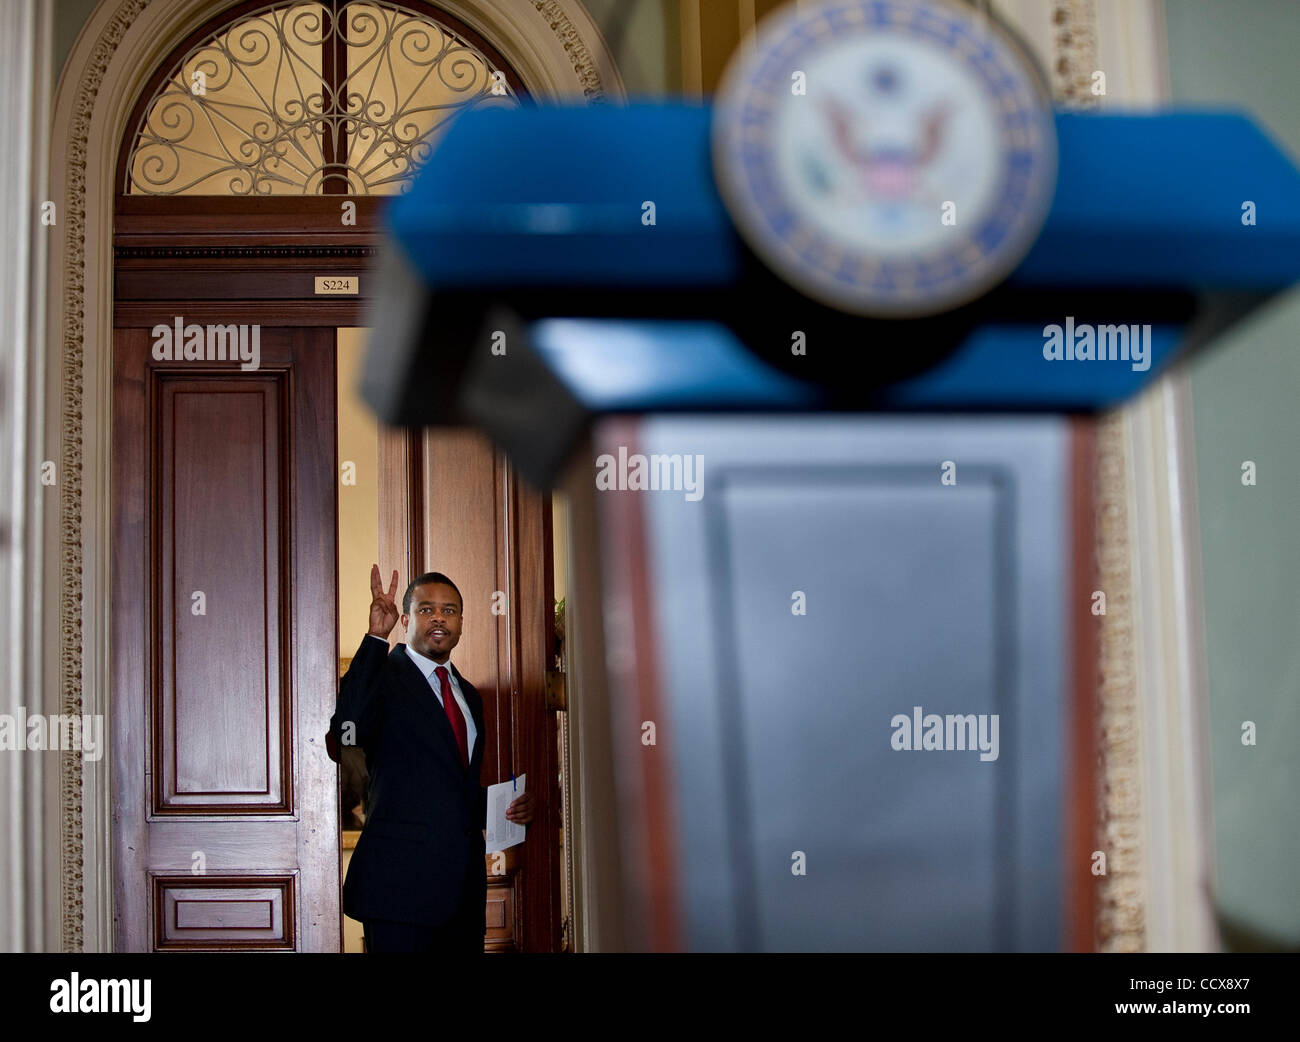 May 26, 2010 - Washington, District of Columbia, U.S., -  Senate Majority Leader Harry Reid's Press Secretary Rodell Mollineau, signals three minutes to the waiting media before the start of a press conference introducing the co-chairs of the National Commission on Fiscal Responsibilty and Reform. ( Stock Photo